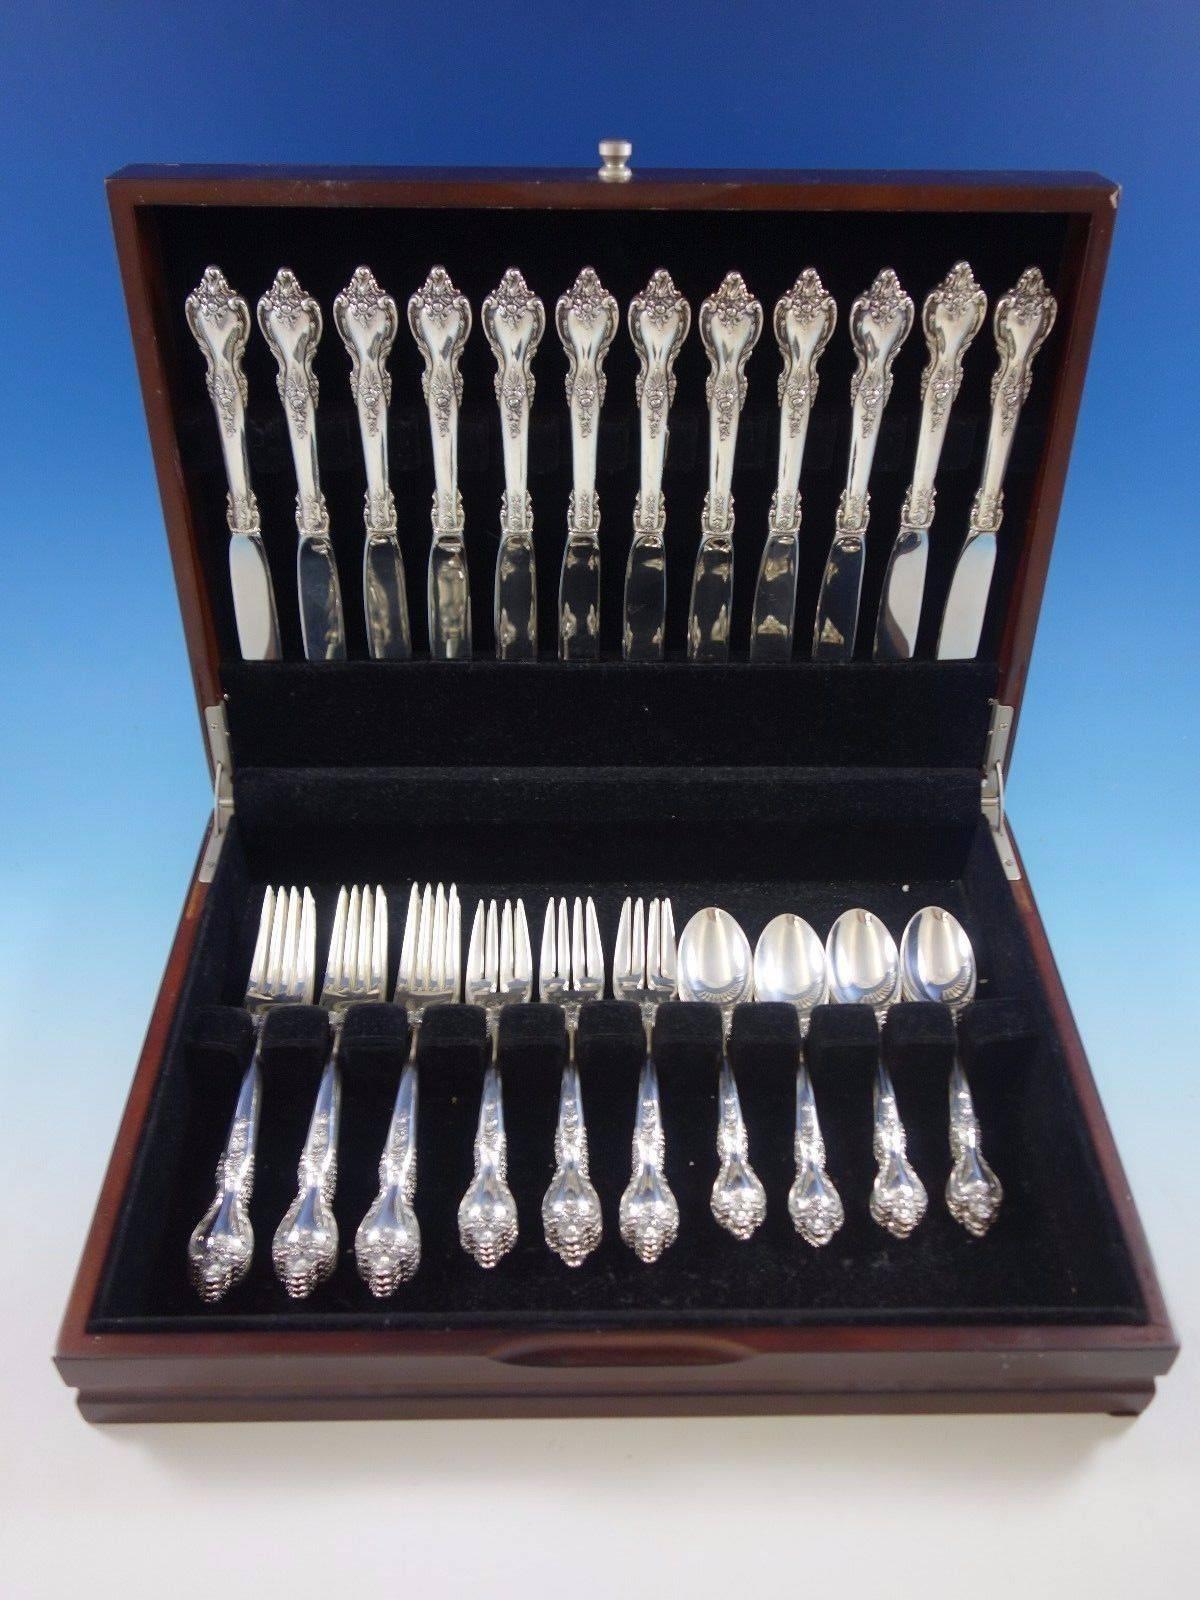 Delacourt by Lunt sterling silver Flatware set, 48 pieces. This set includes: 

12 knives, 9 1/4